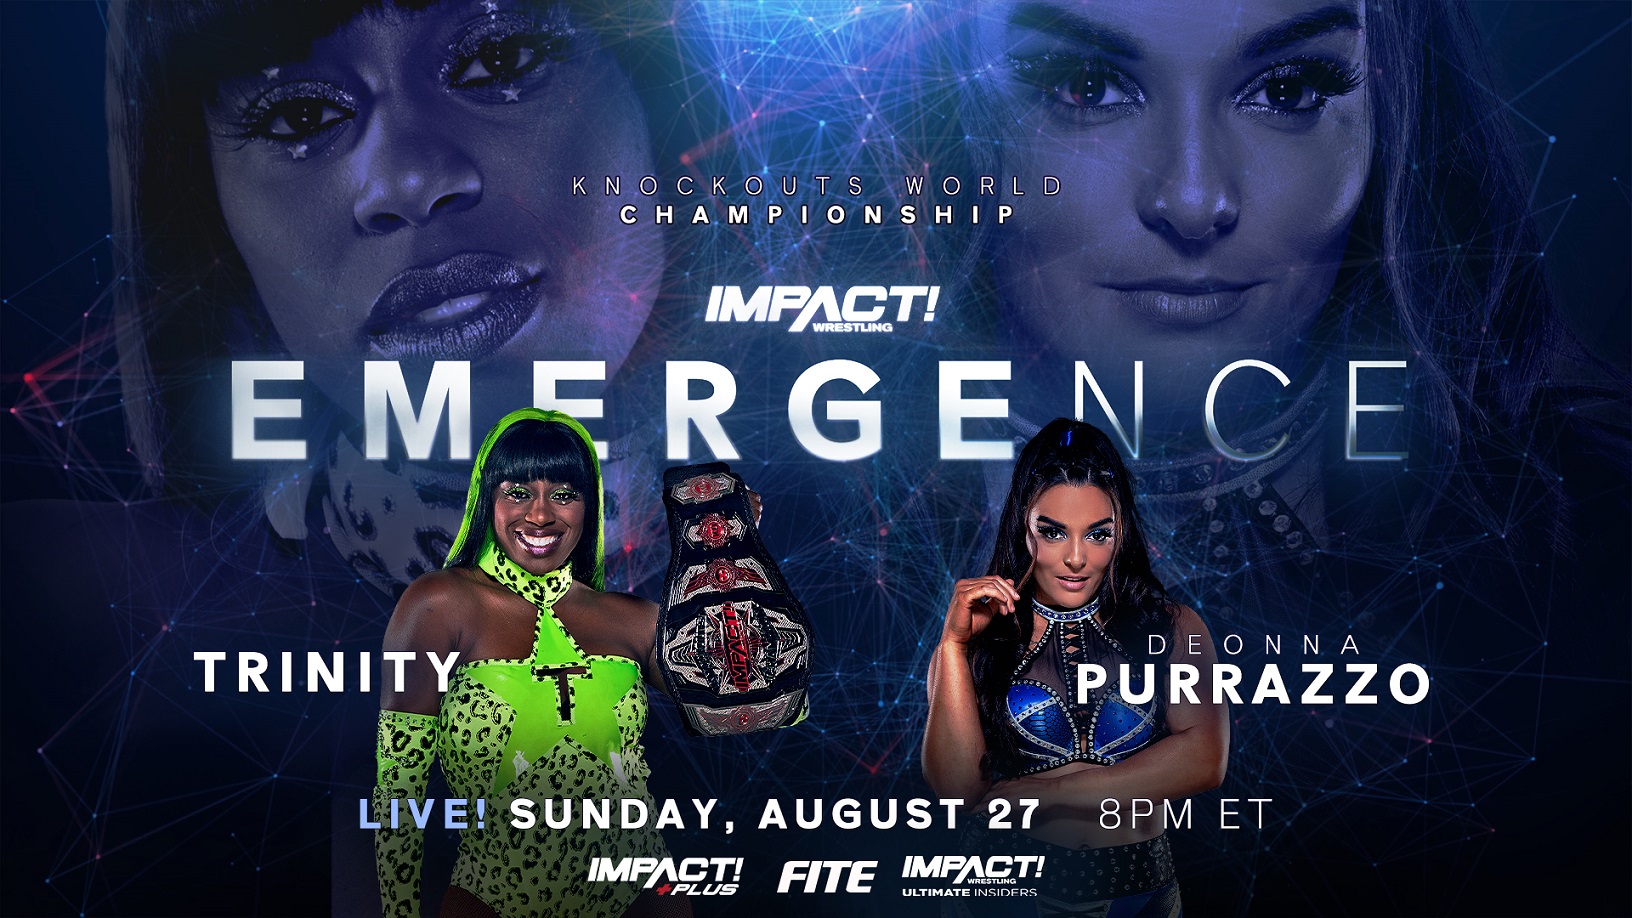 Deonna Purrazzo to Challenge Trinity in Highly-Anticipated Knockouts World Title Rematch at Emergence